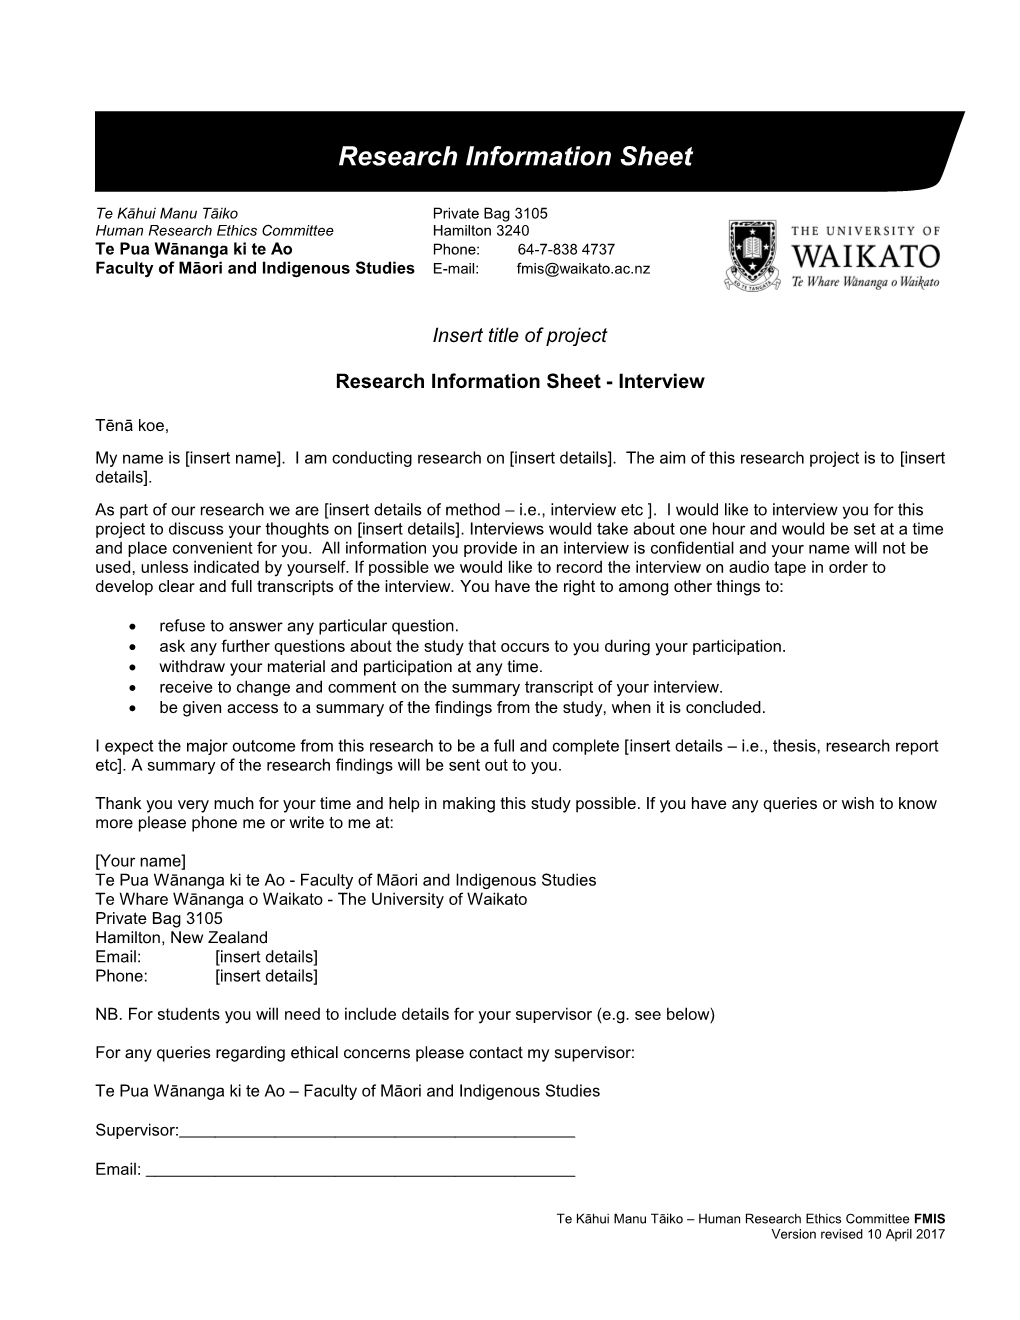 Research Information Sheet - Interview